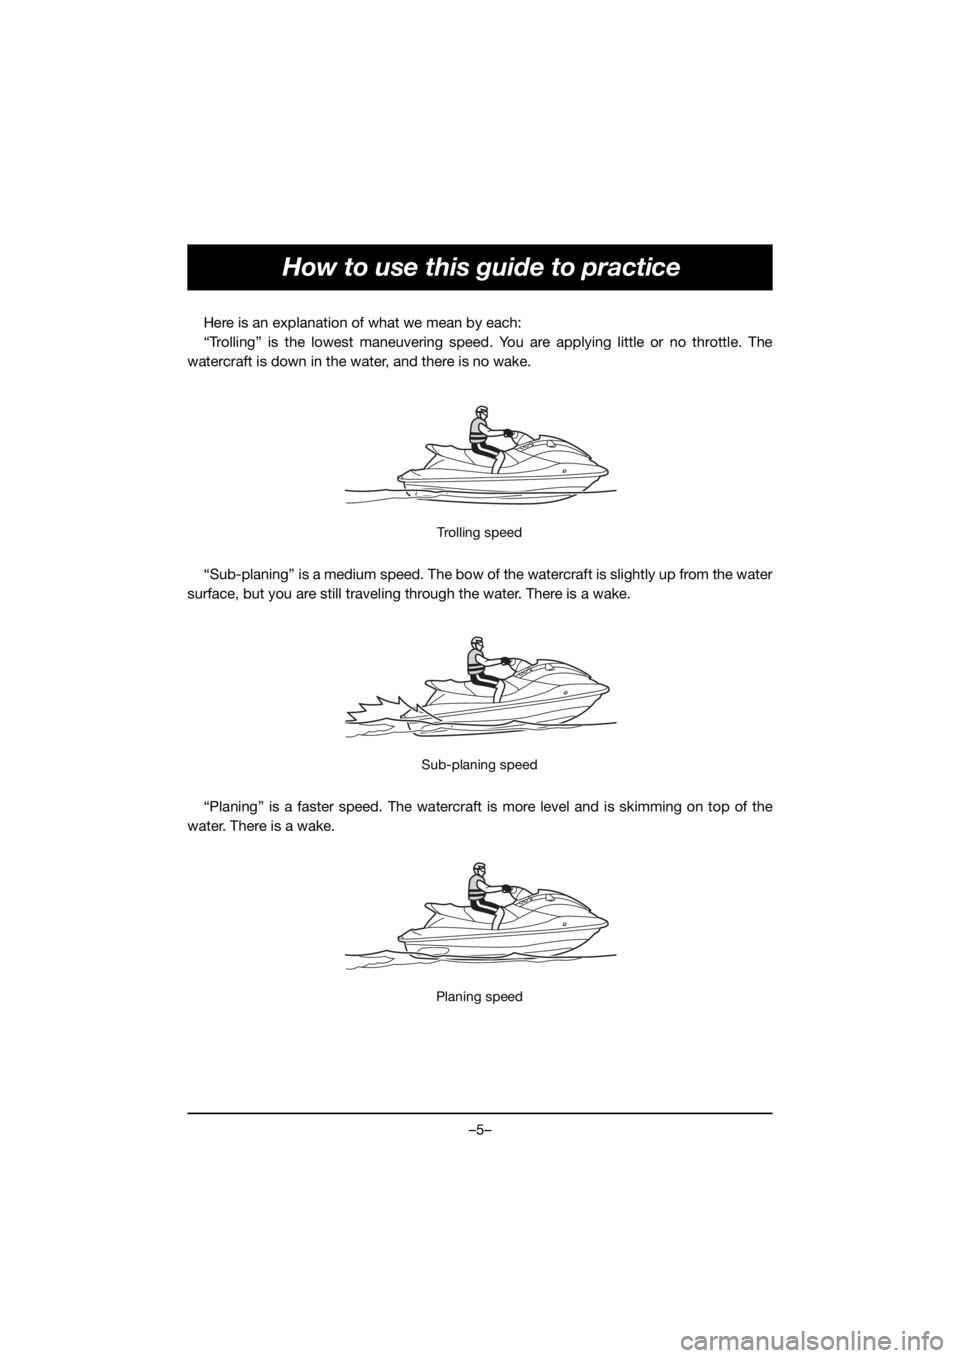 YAMAHA VX DELUXE 2021  Manuale duso (in Italian) –5–
How to use this guide to practice
Here is an explanation of what we mean by each:
“Trolling” is the lowest maneuvering speed. You are applying little or no throttle. The
watercraft is down